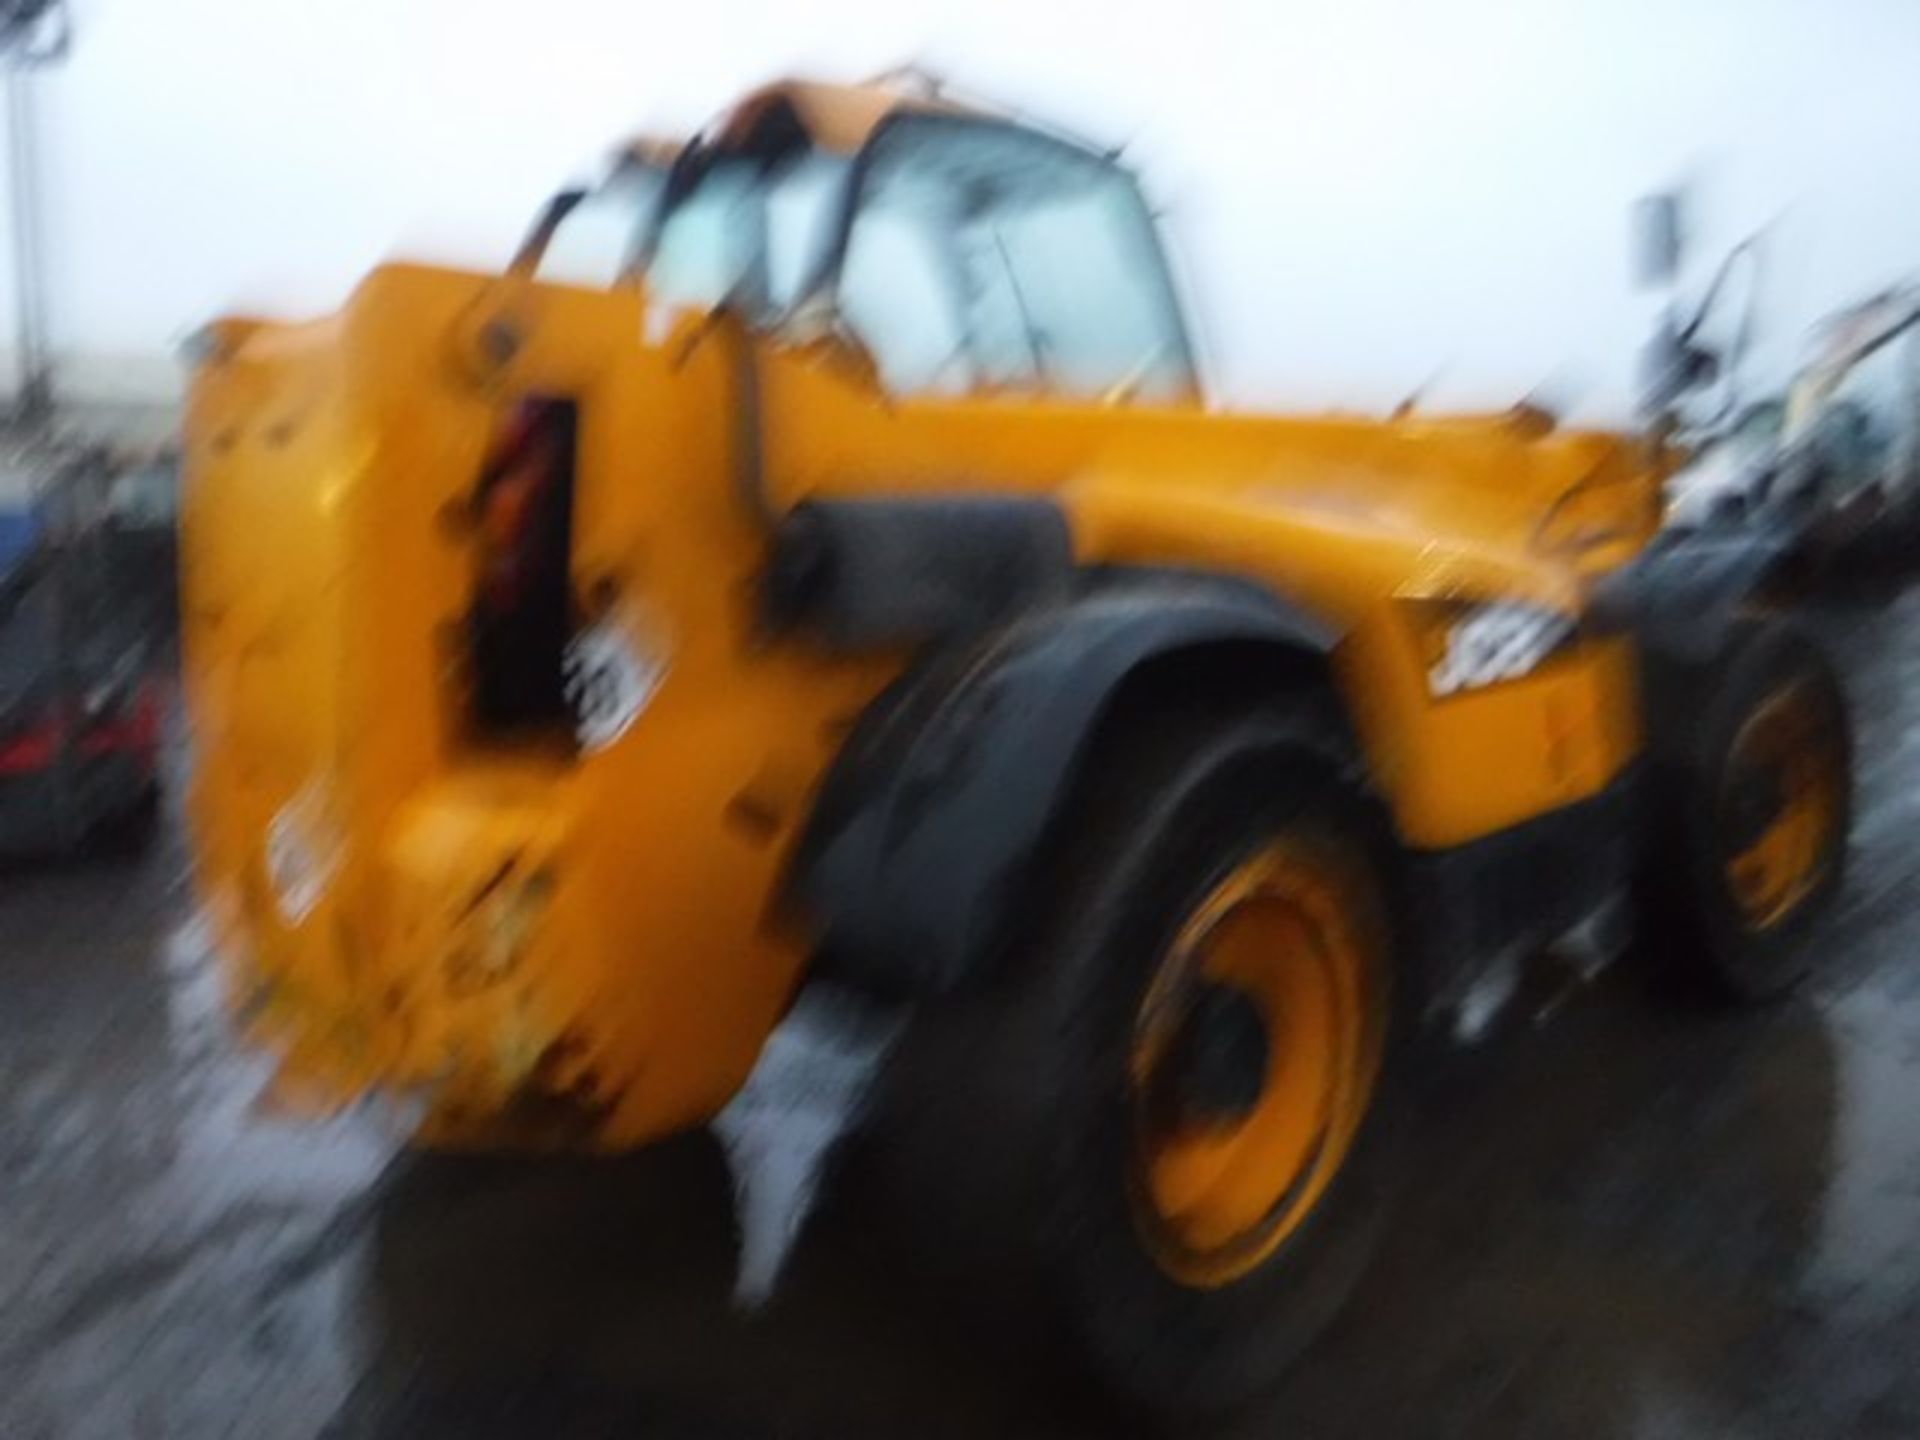 2012 JCB 550 - 80 WASTE SPECIAL TELESCOPIC HANDLER, 8870hrs (NOT VERIFIED) ON SOLID TYRES - Image 7 of 13